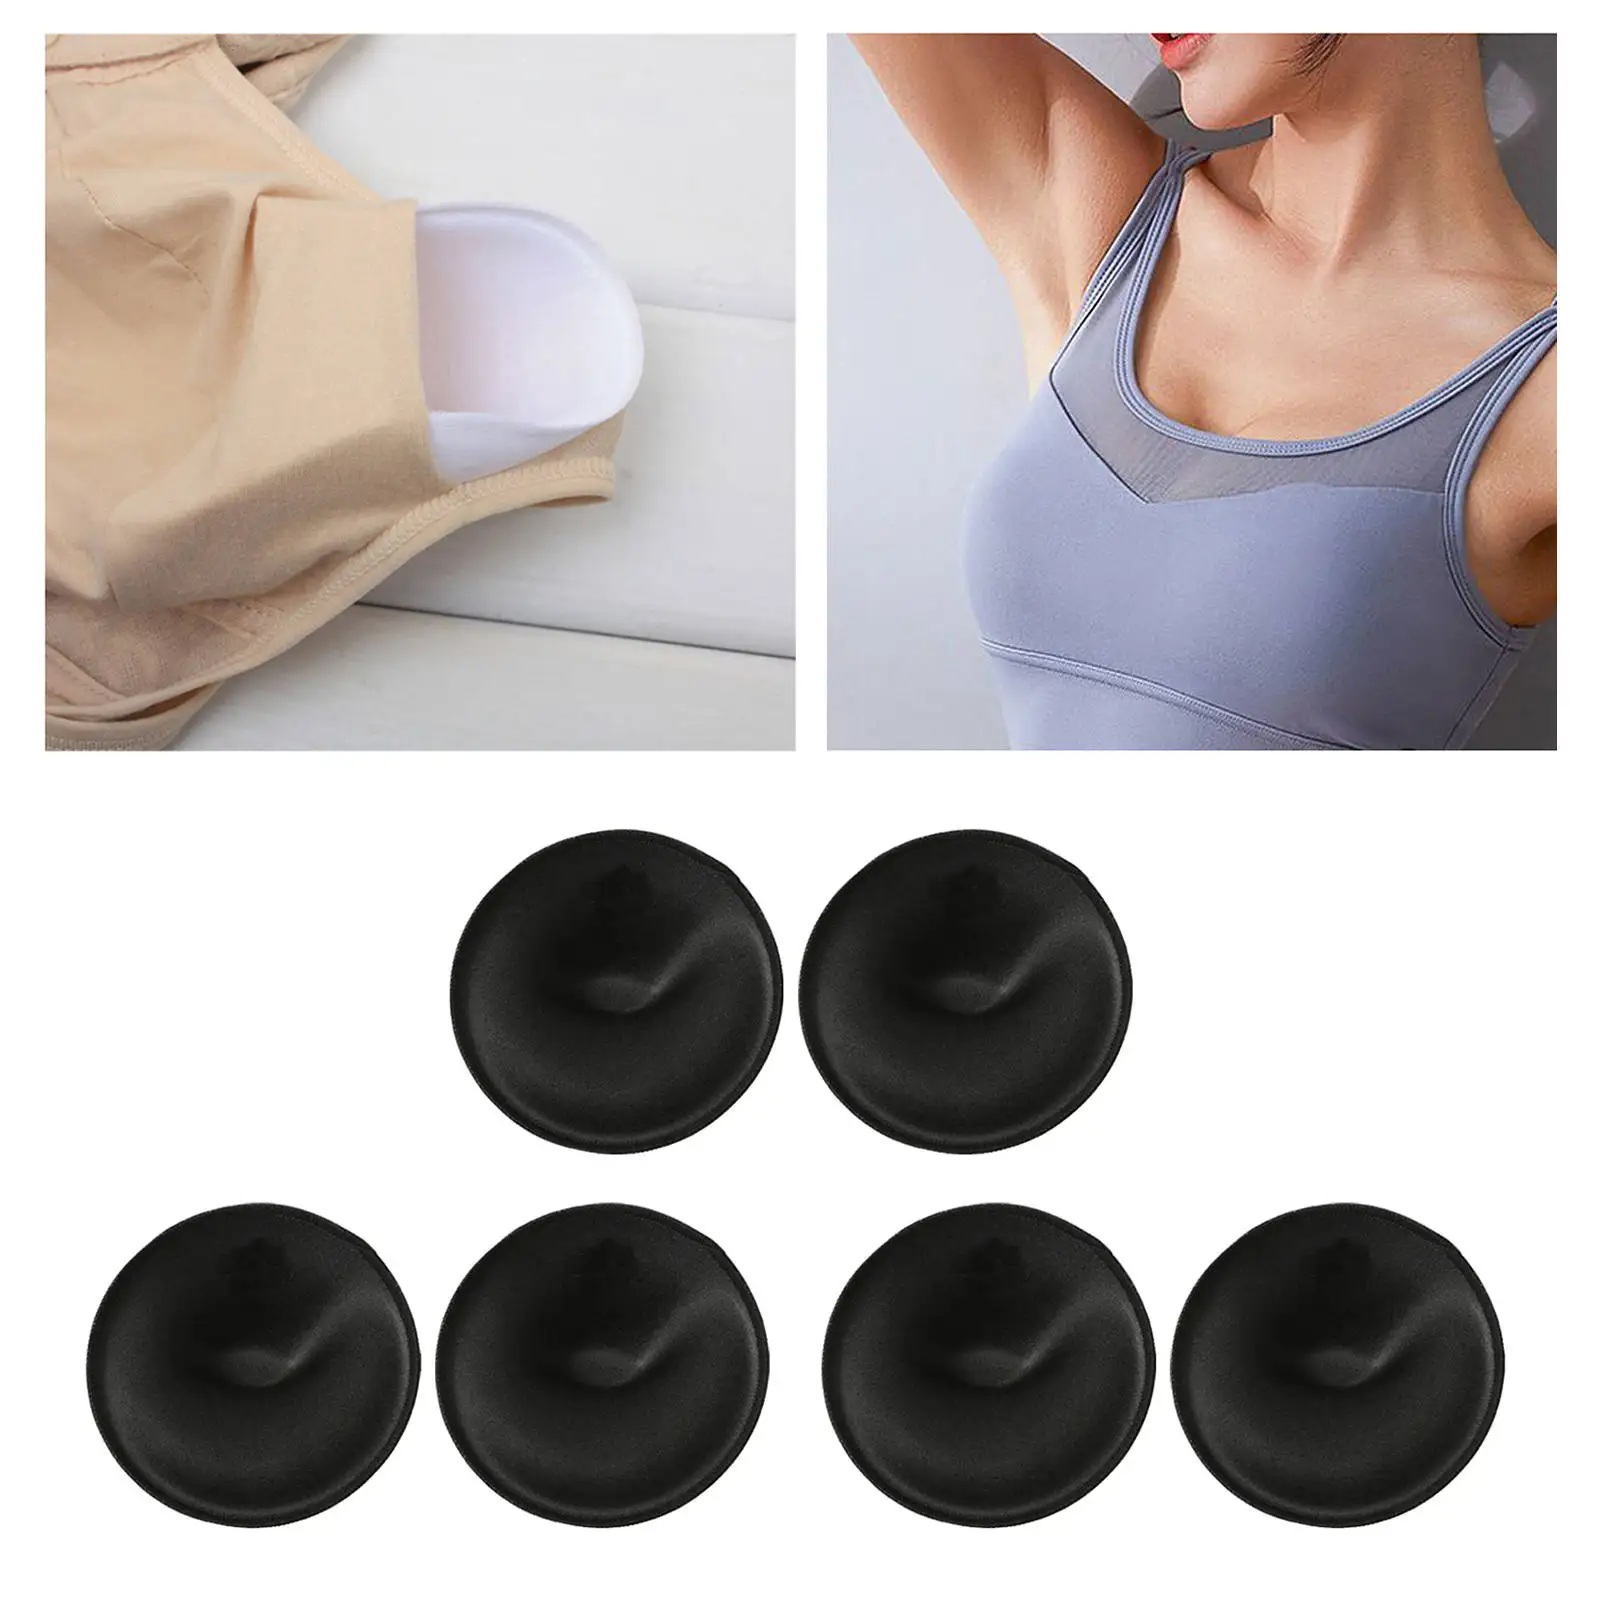 CHICTRY 3/6 Pairs Sponge Bra Inserts Pads Removable Push Up Liner Pad Bra Inserts for Crop Top Bikini Swimsuit Mastectomy